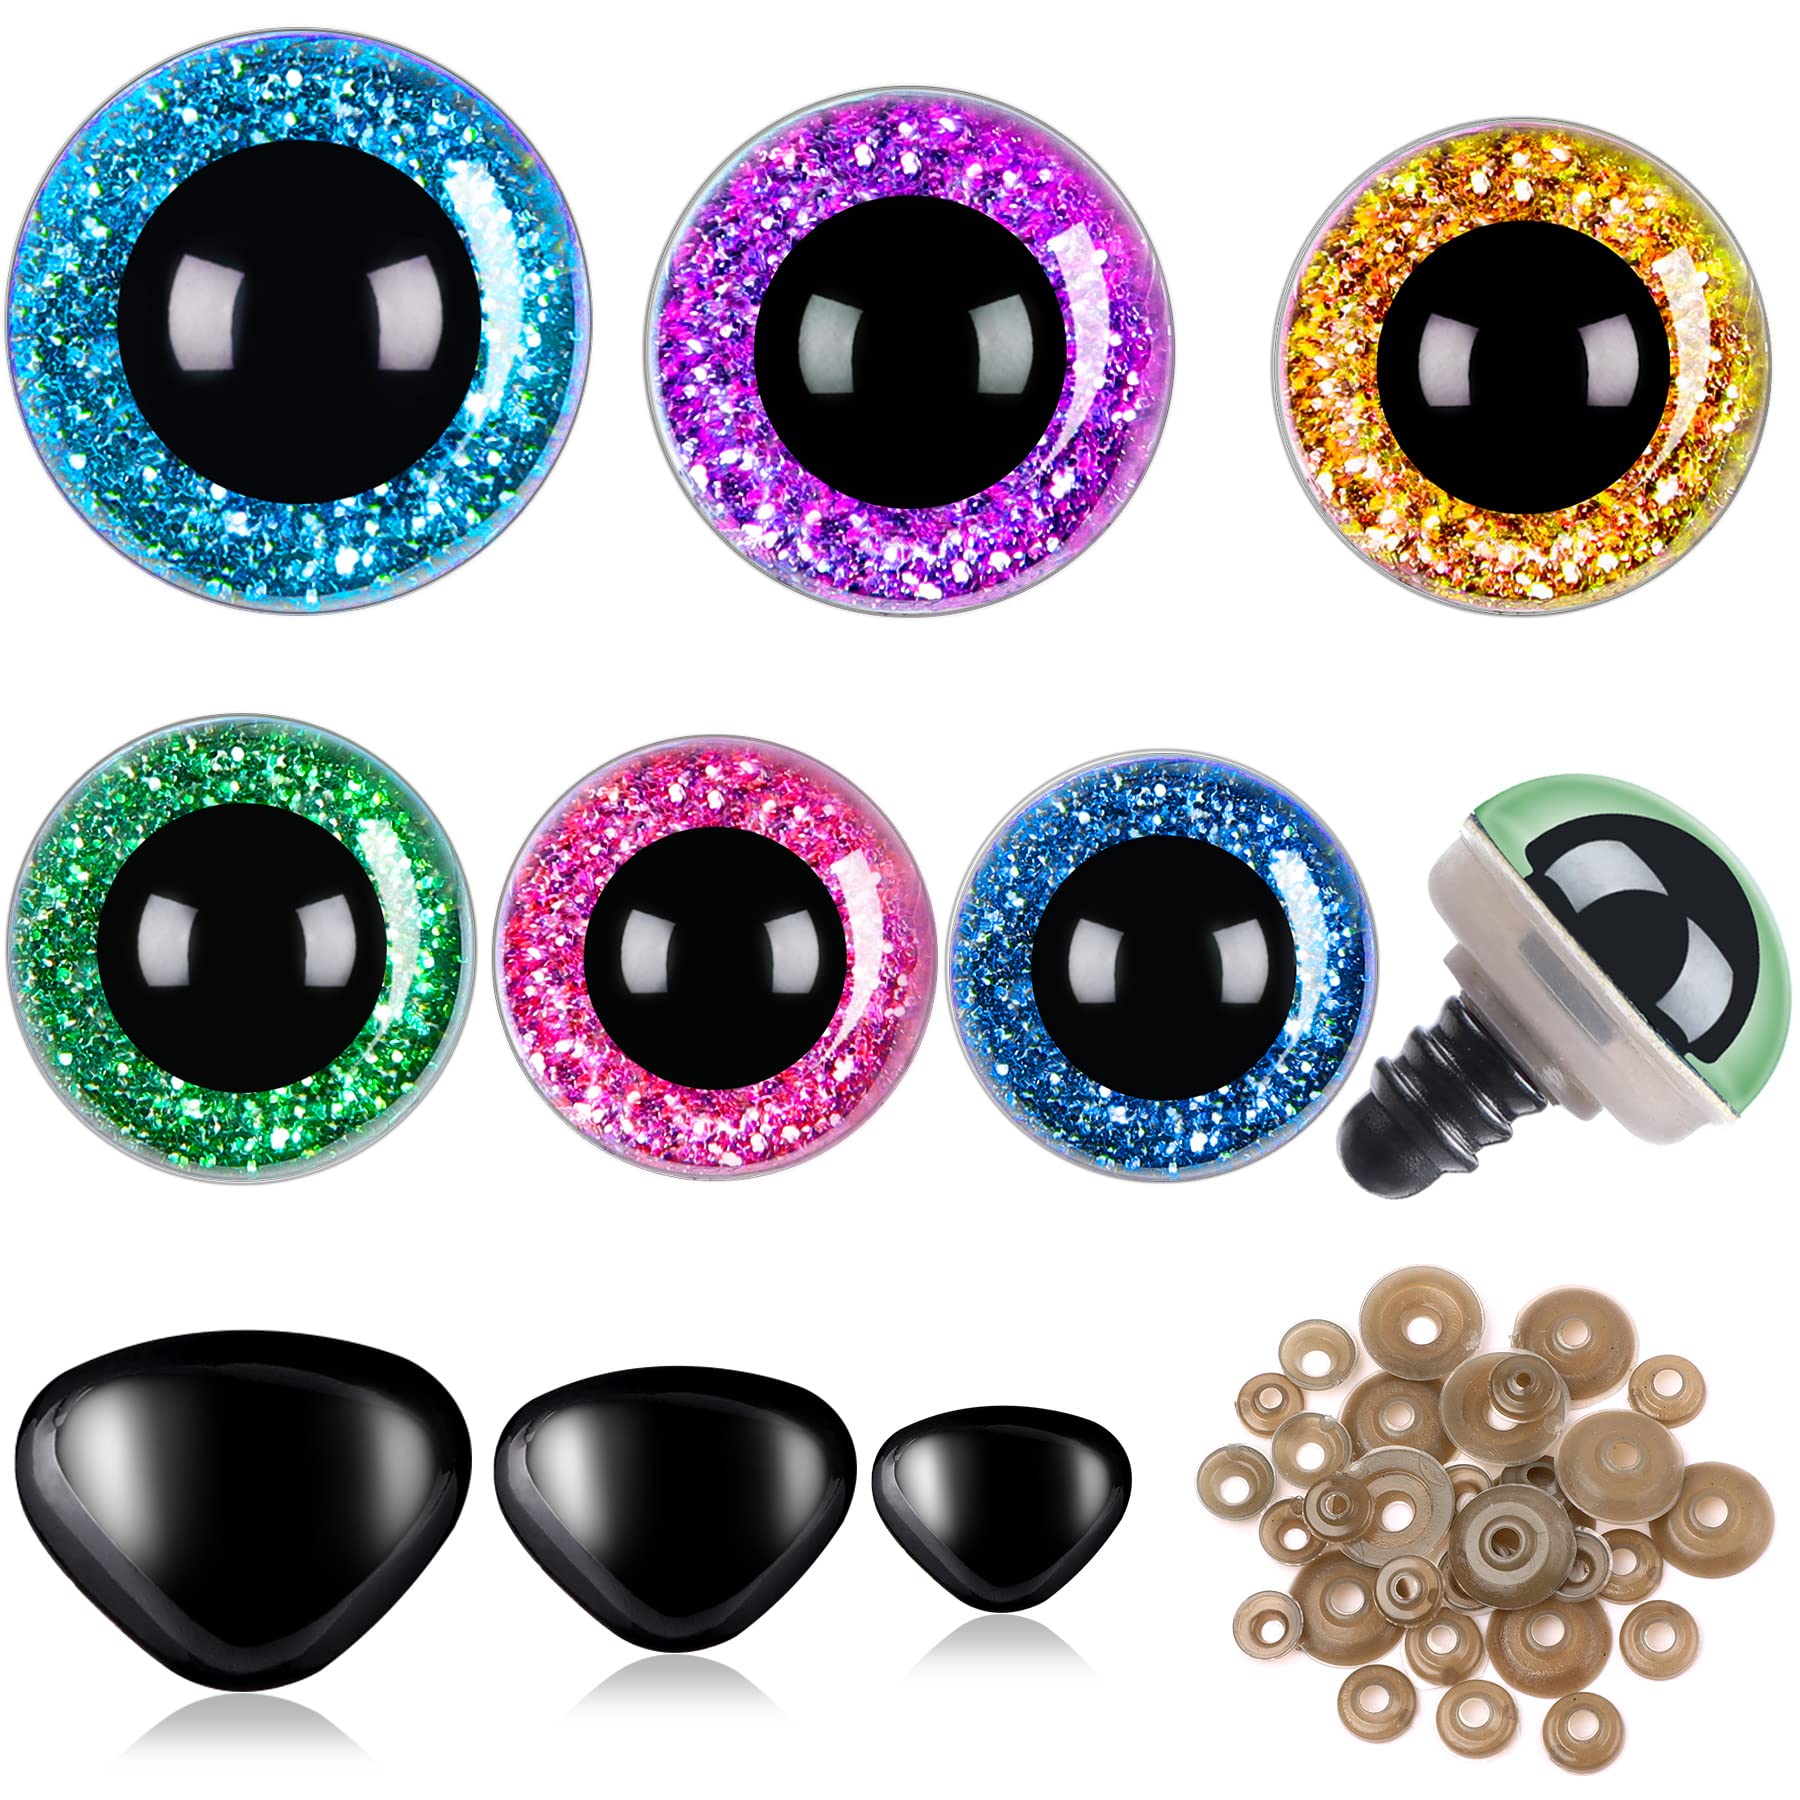 Black Plastic Safety Eyes Plastic Safety Eyes Craft Eyes and Safety Noses  with Washers for Doll, Puppet, Plush Animal 